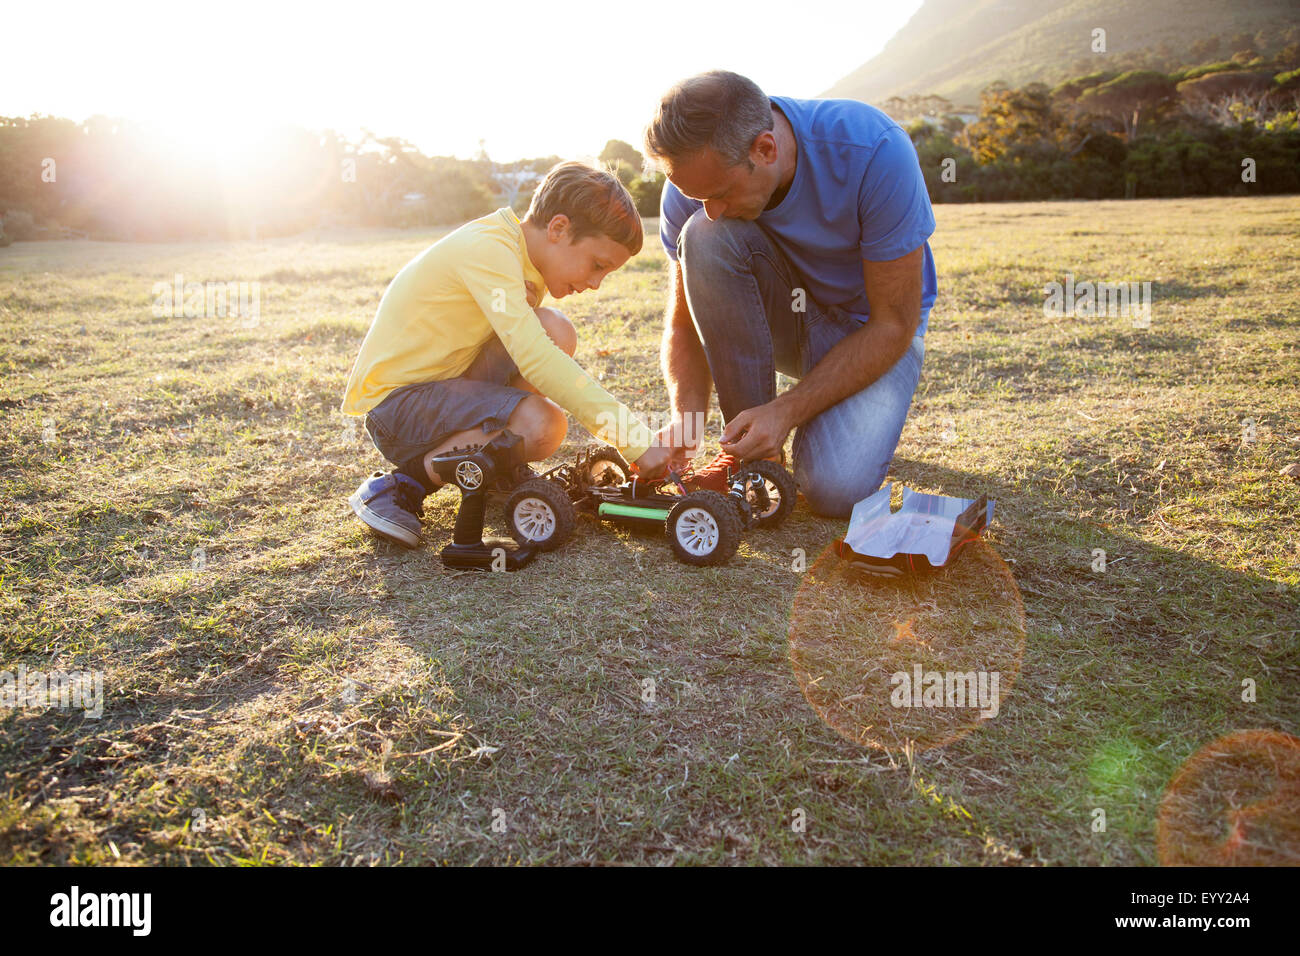 Caucasian father and son playing with remote control cars in field Stock Photo